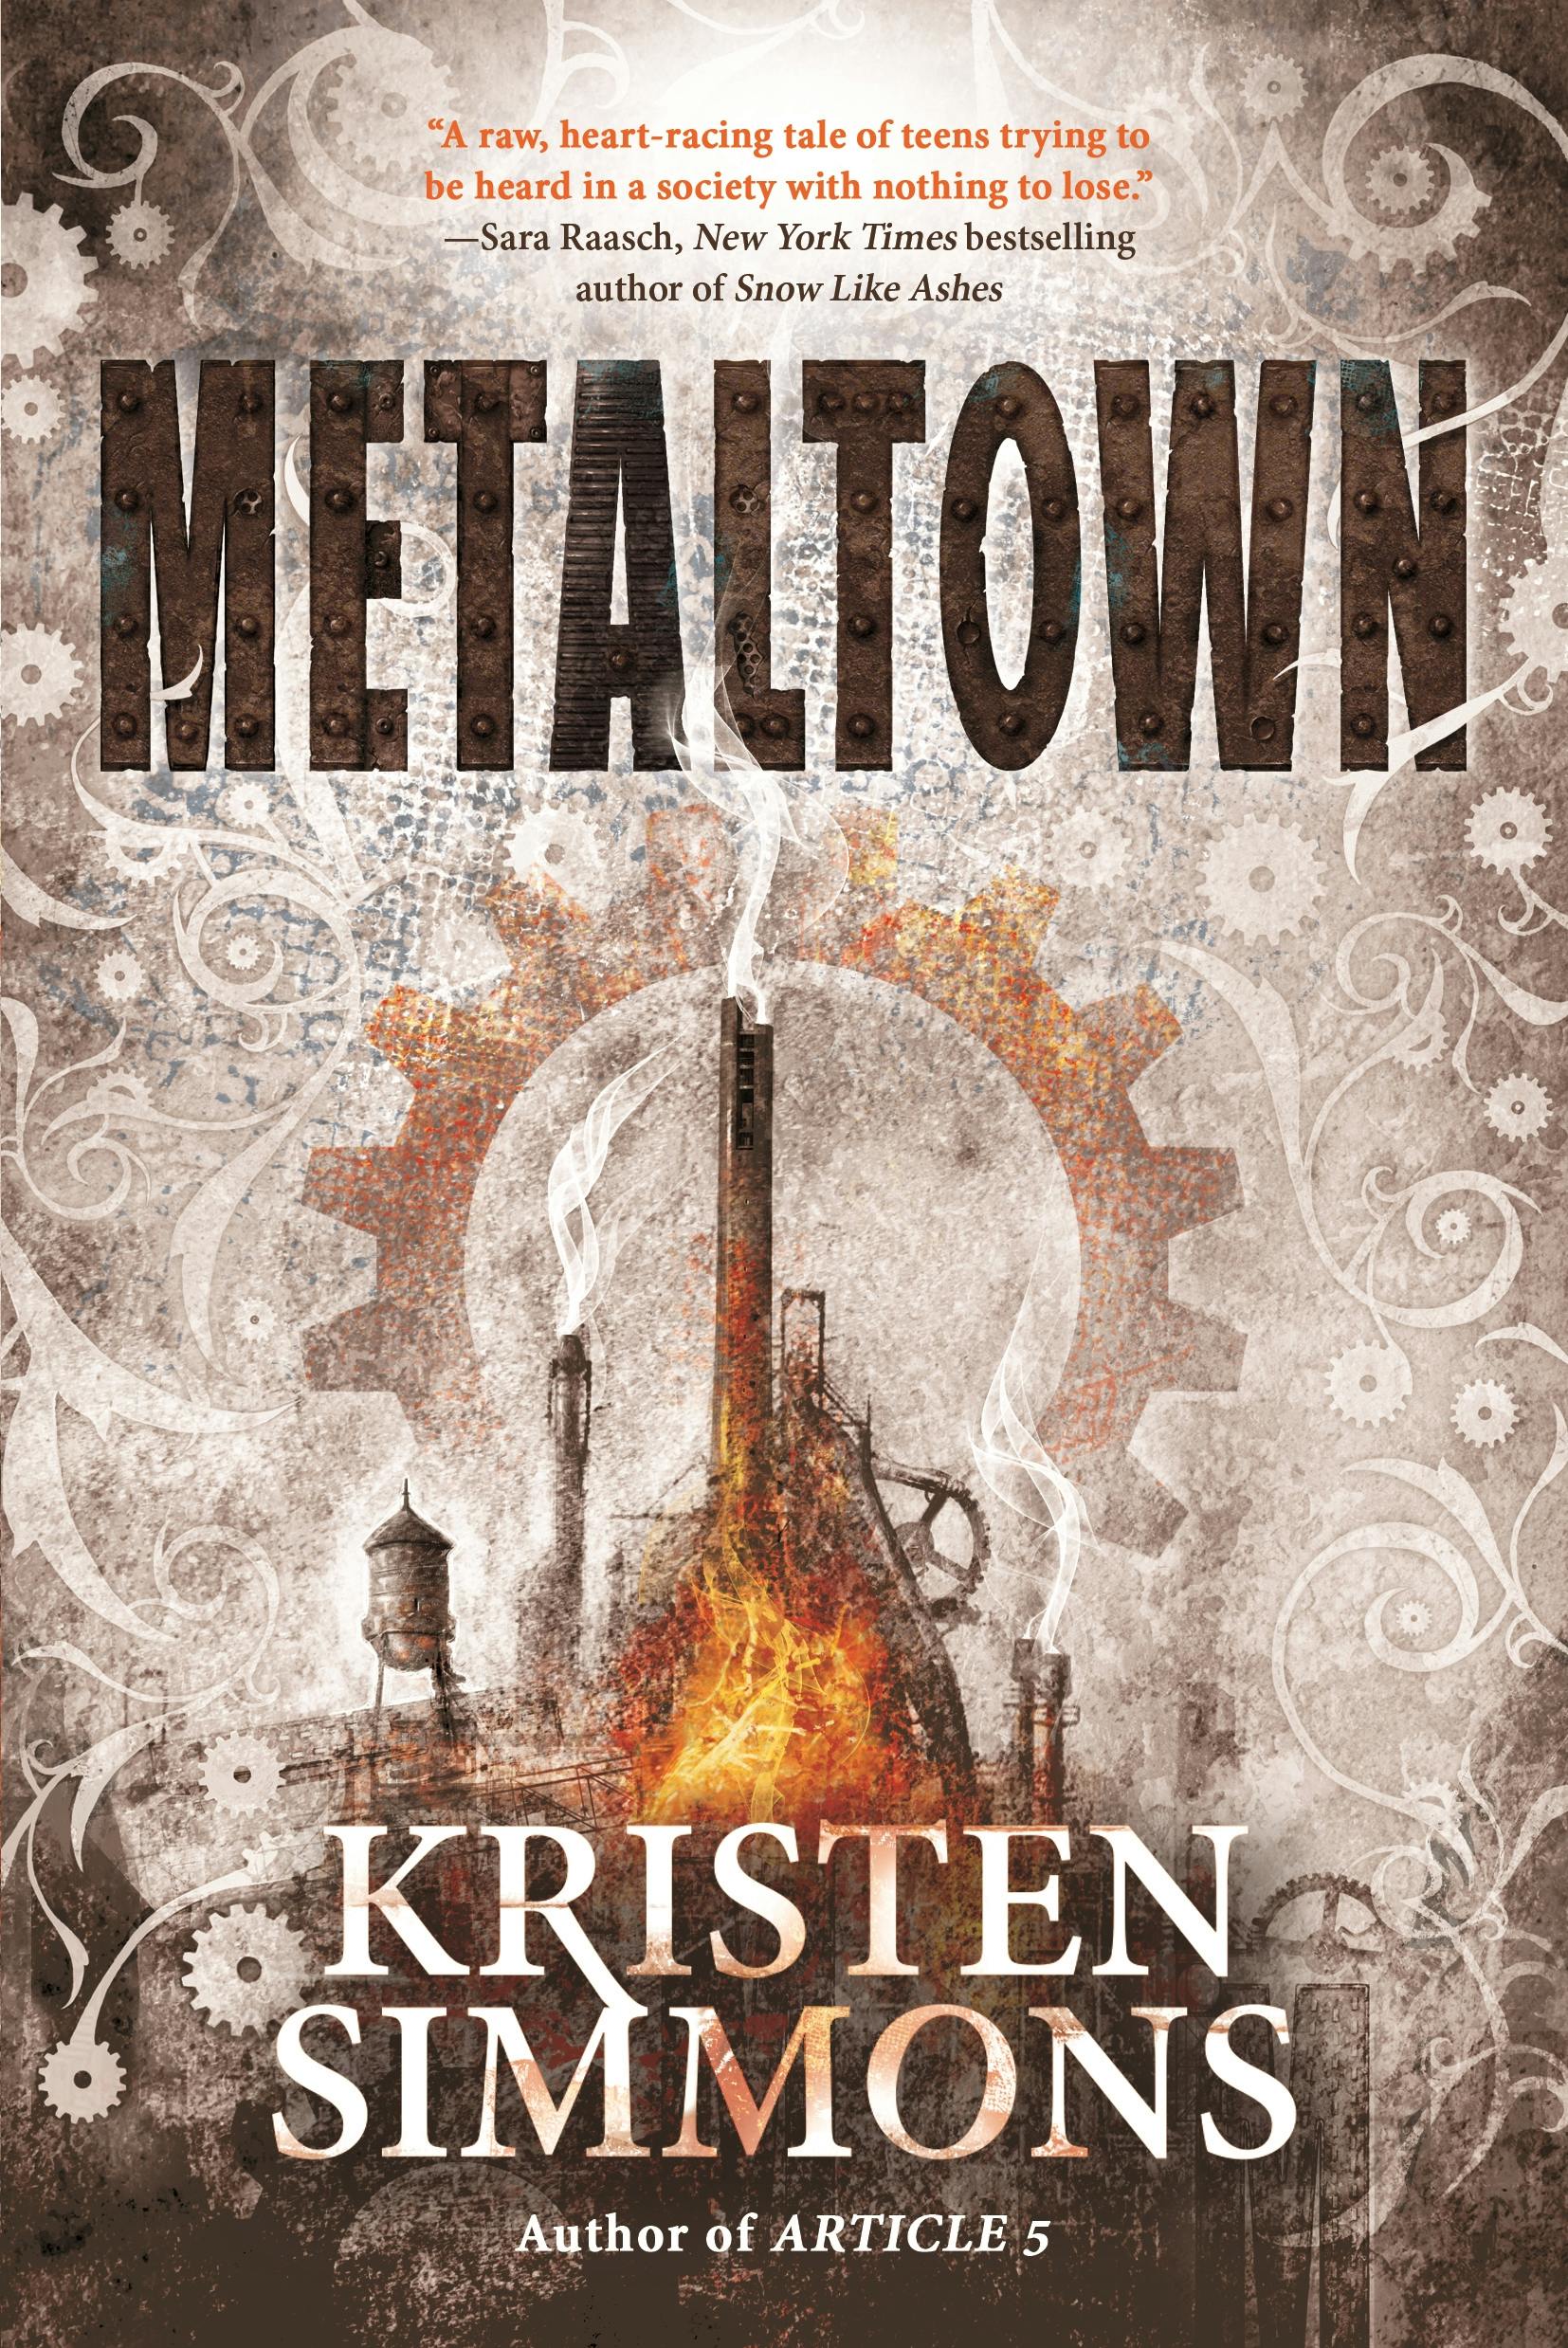 Cover for the book titled as: Metaltown